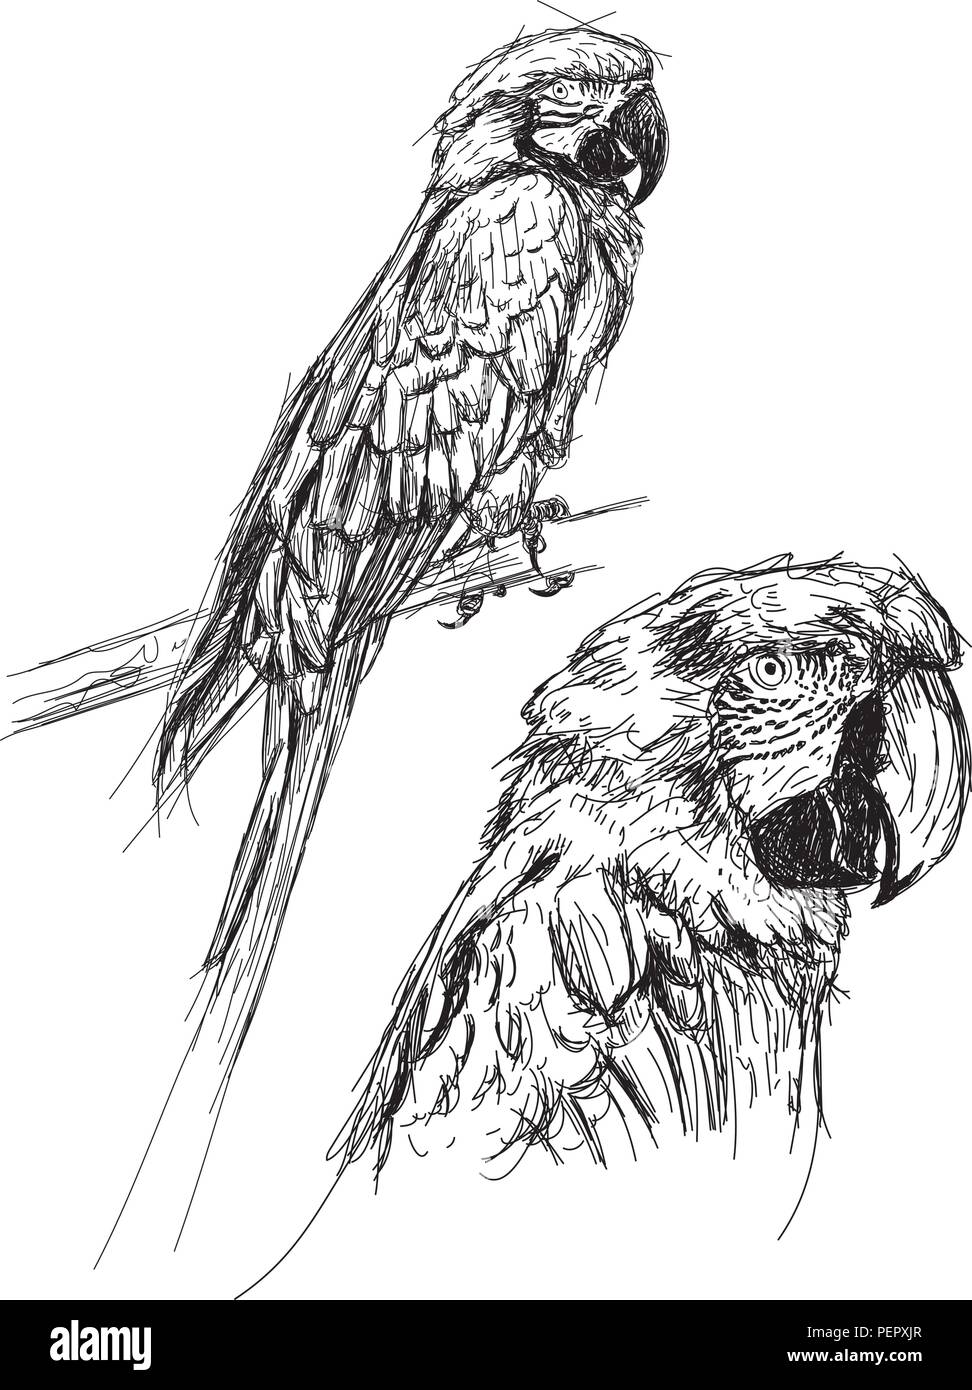 How To Sketch A Parrot by Dawn | dragoart.com | Parrot drawing, Eagle  drawing, Drawings